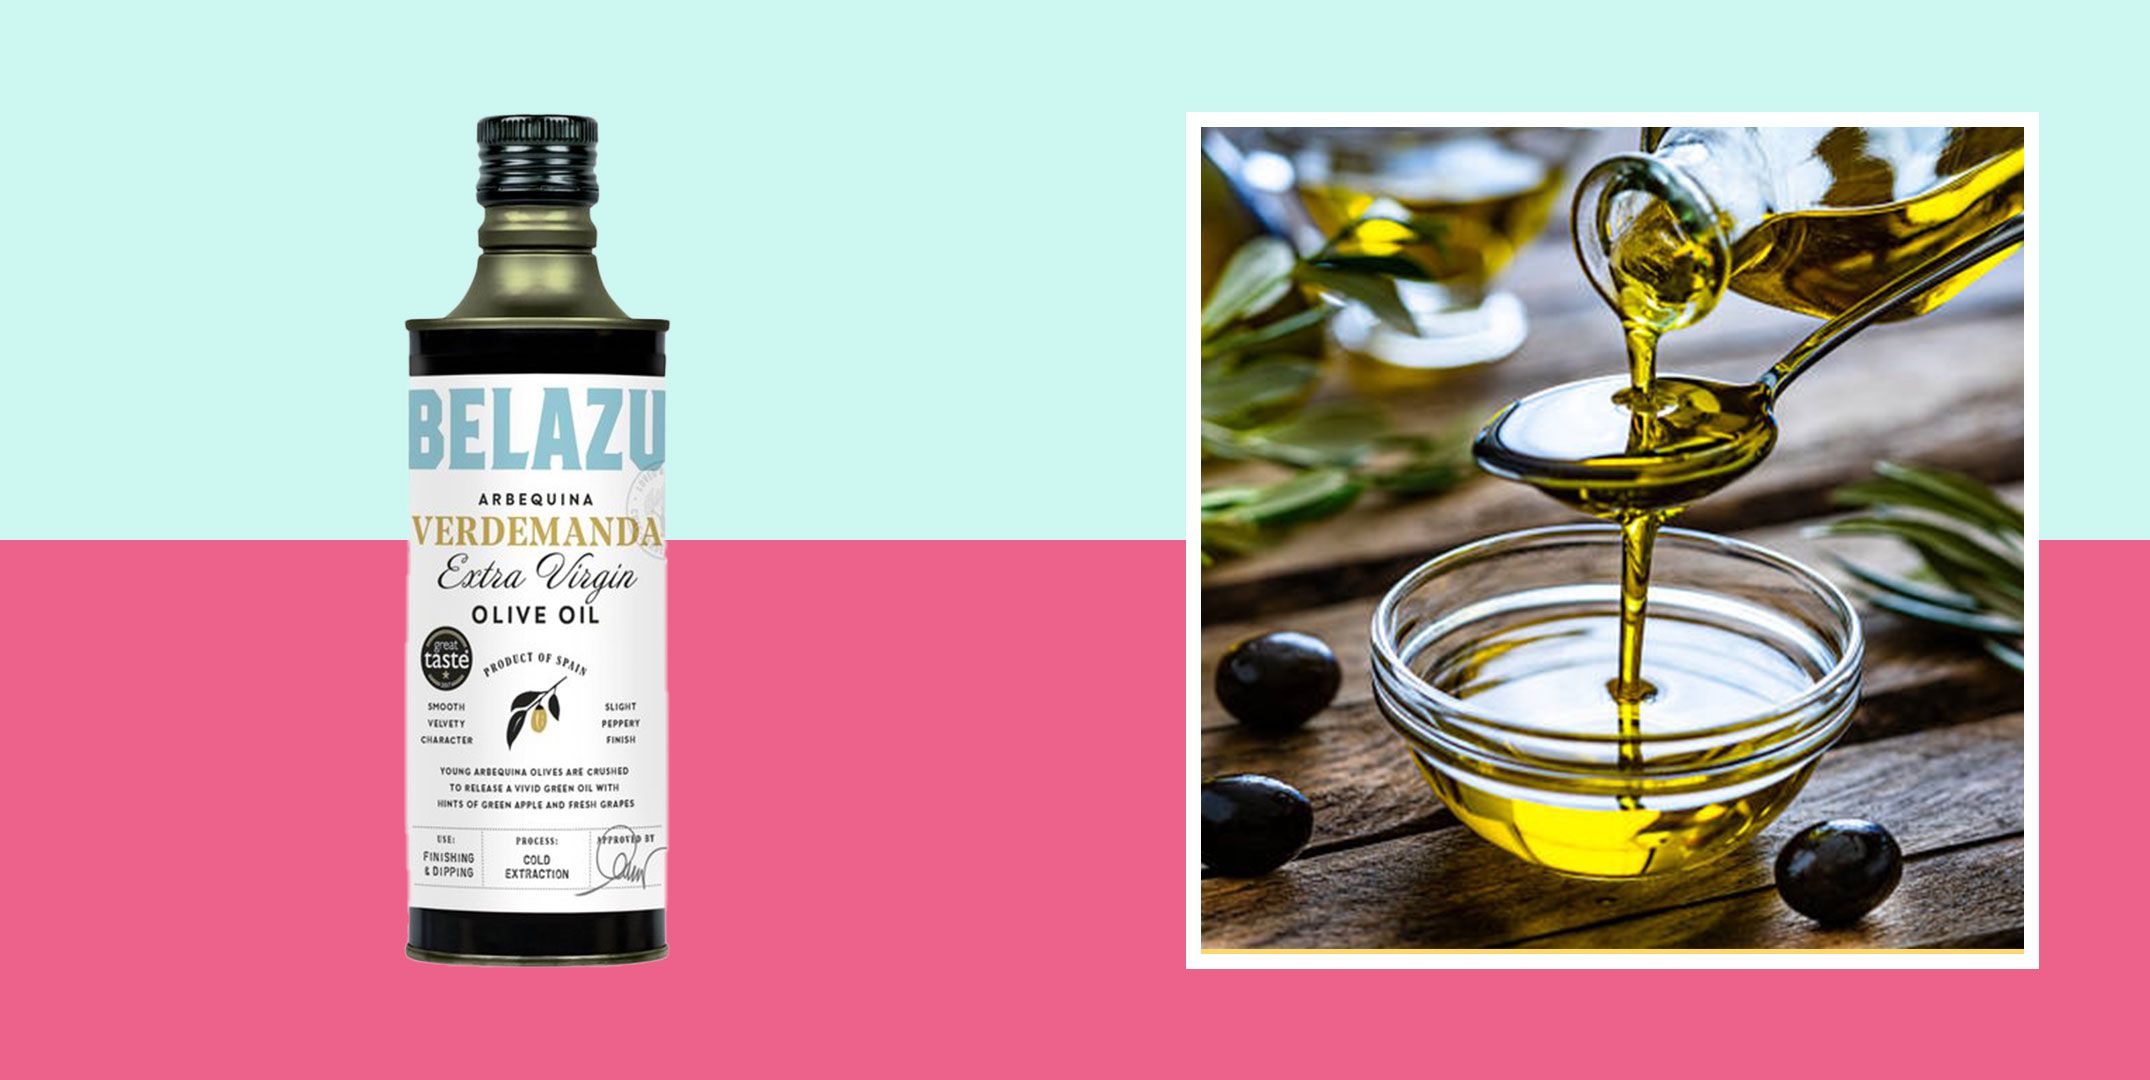 15 Benefits of Olive Oil for Skin: How to Use Olive Oil for Fair